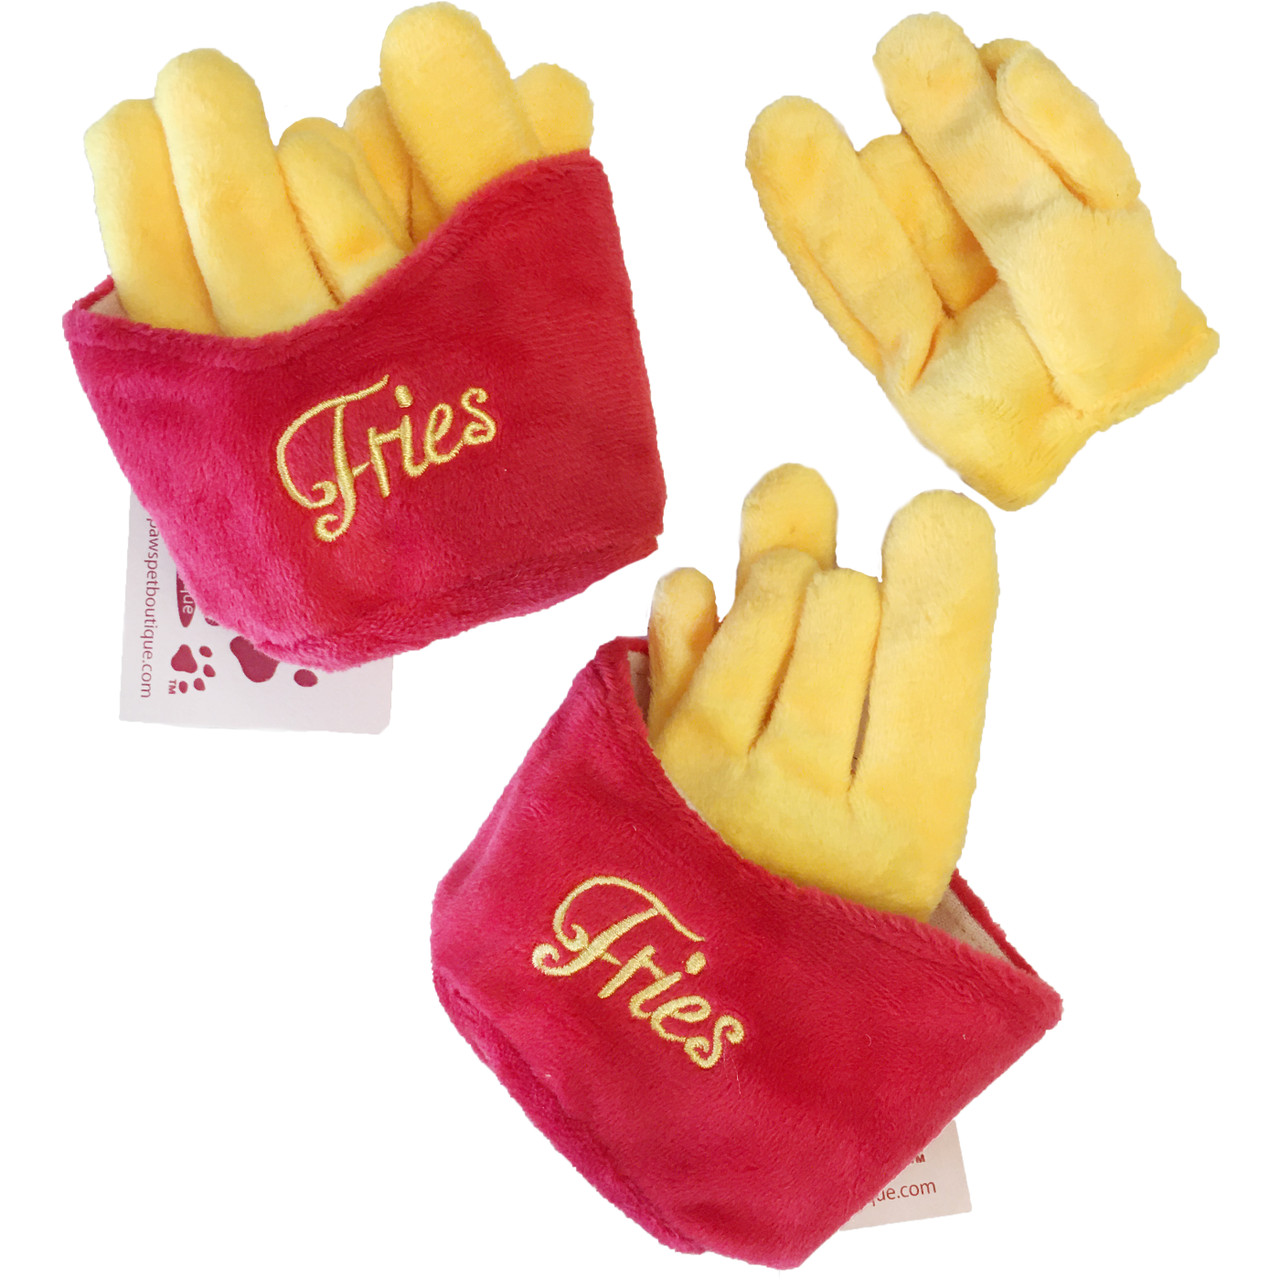 https://cdn11.bigcommerce.com/s-53033/images/stencil/1280x1280/products/5944/7608/french_fries_dog_toys__07795.1646338655.jpg?c=2